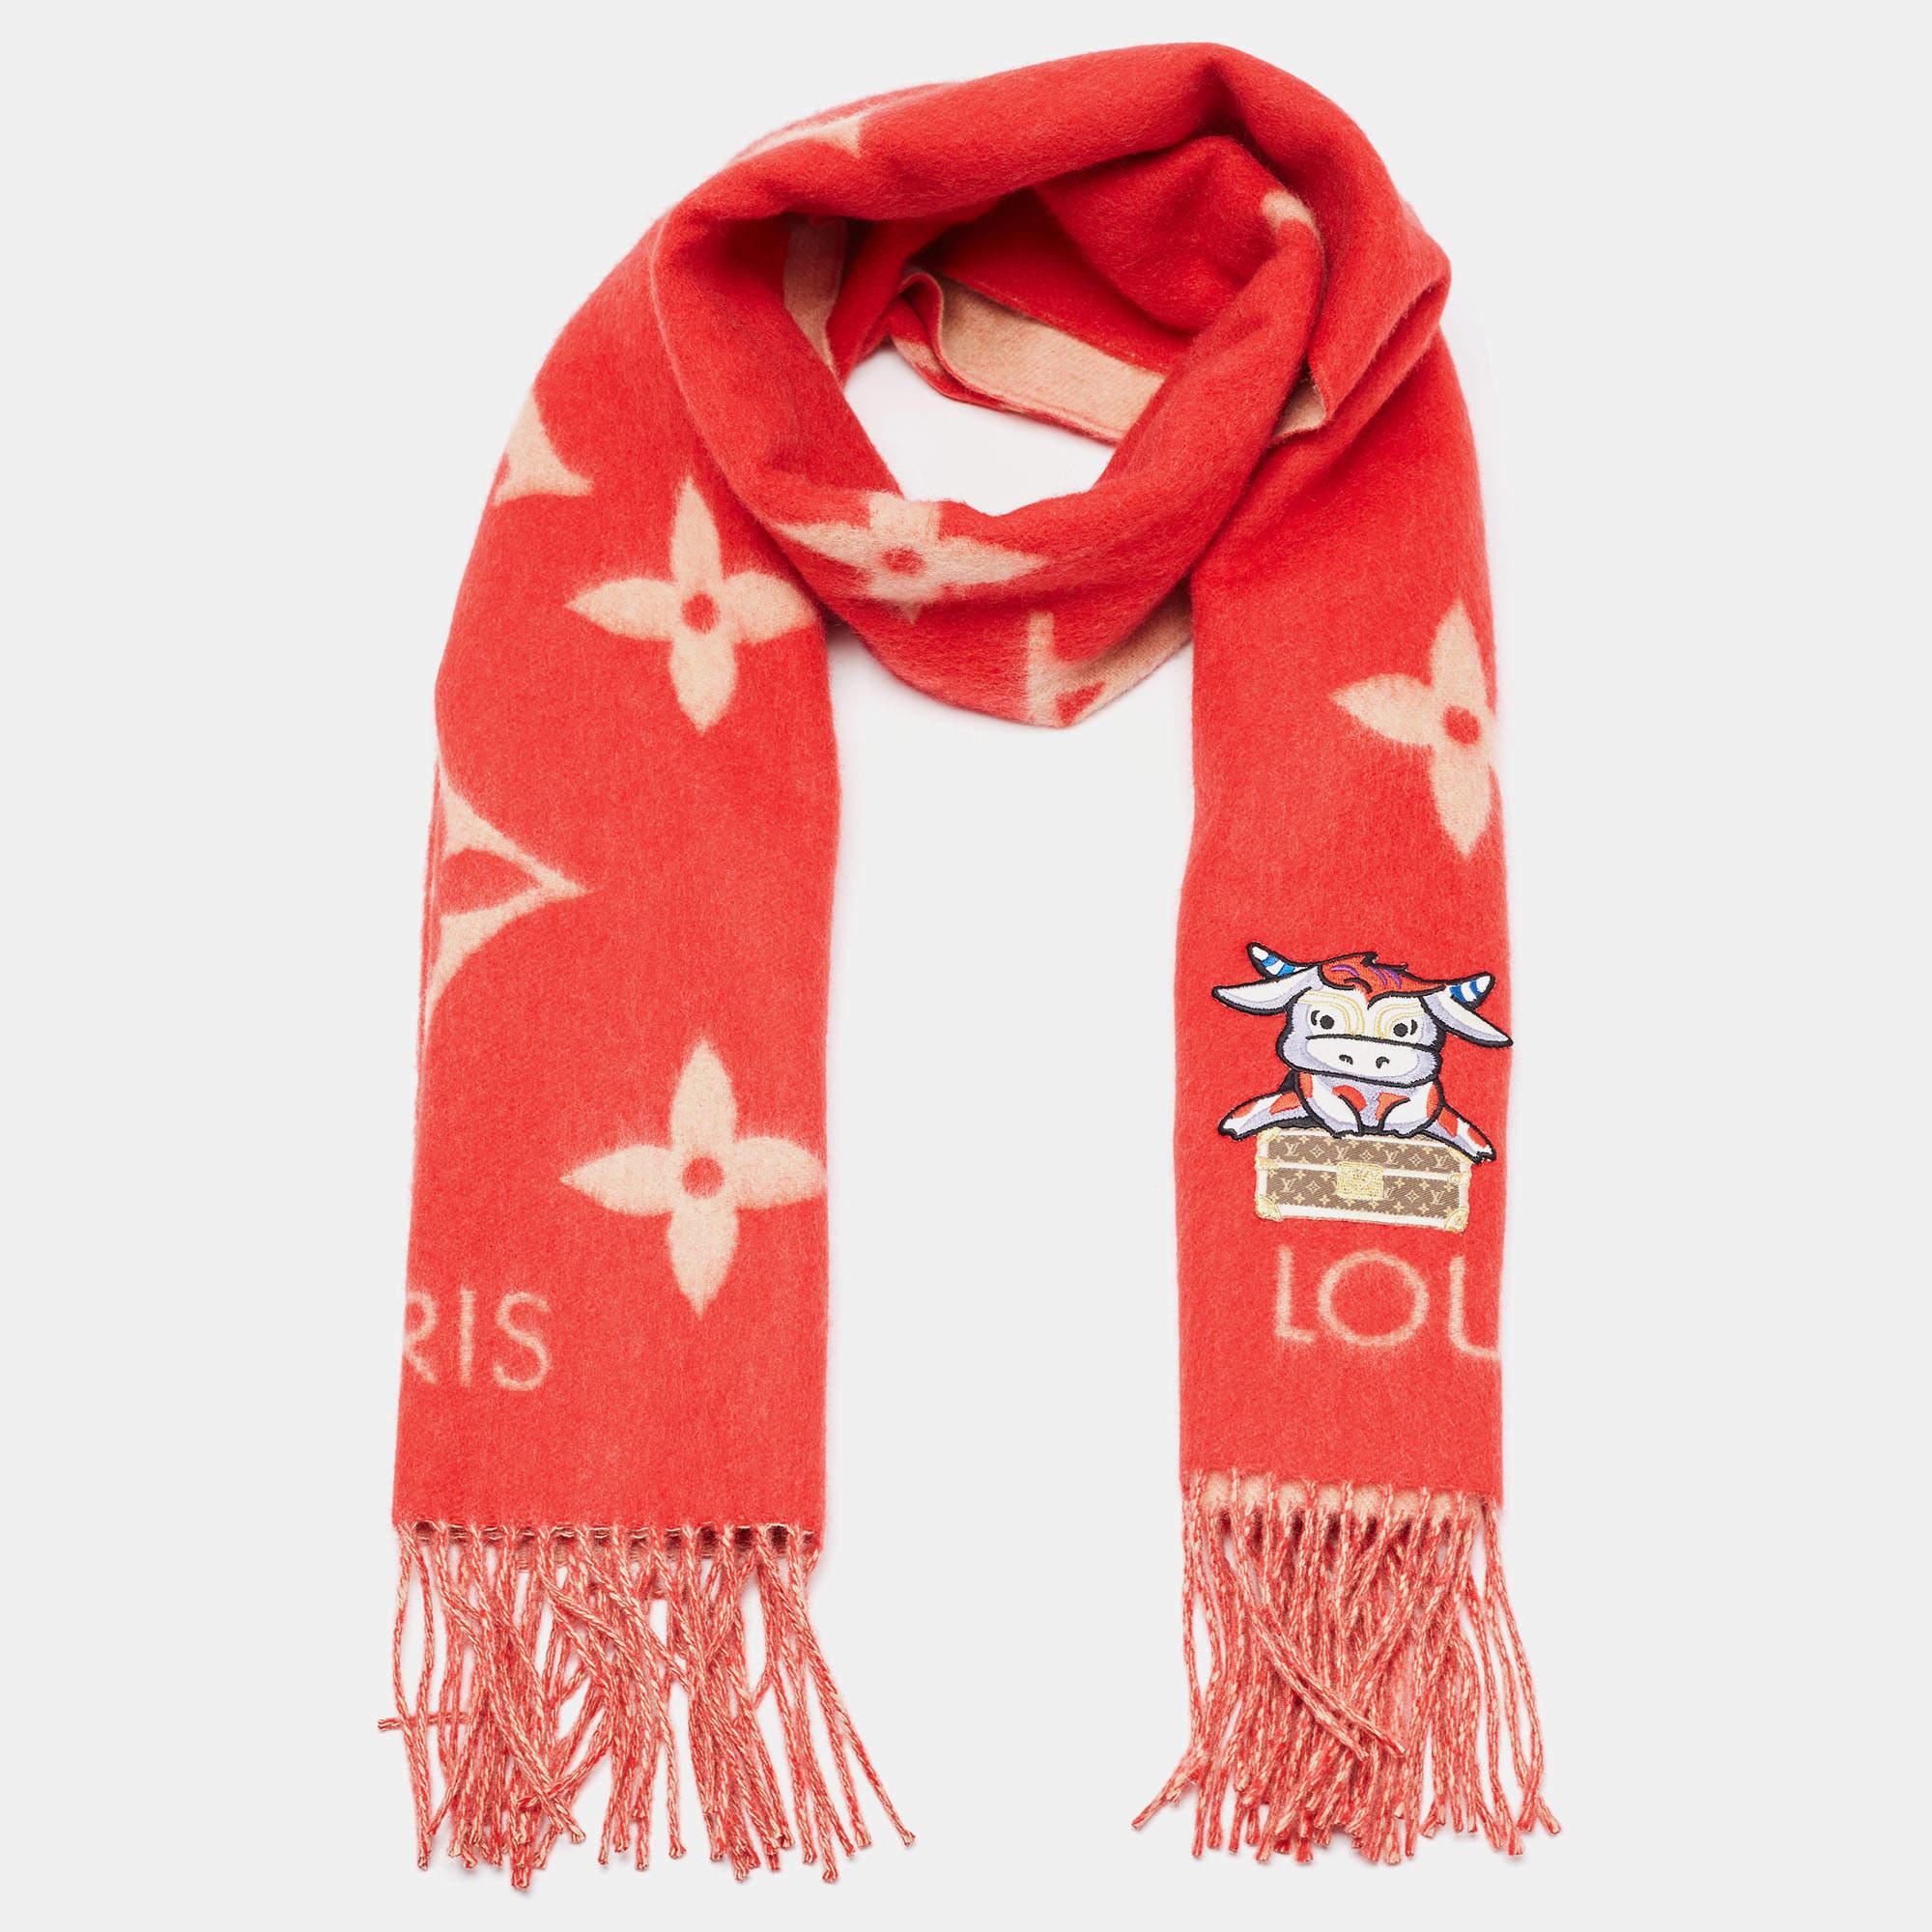 Lovely to look at, this scarf from Louis Vuitton will complement your winter outfits and keep you warm. The red scarf is made of cashmere and features the Monogram all over.




